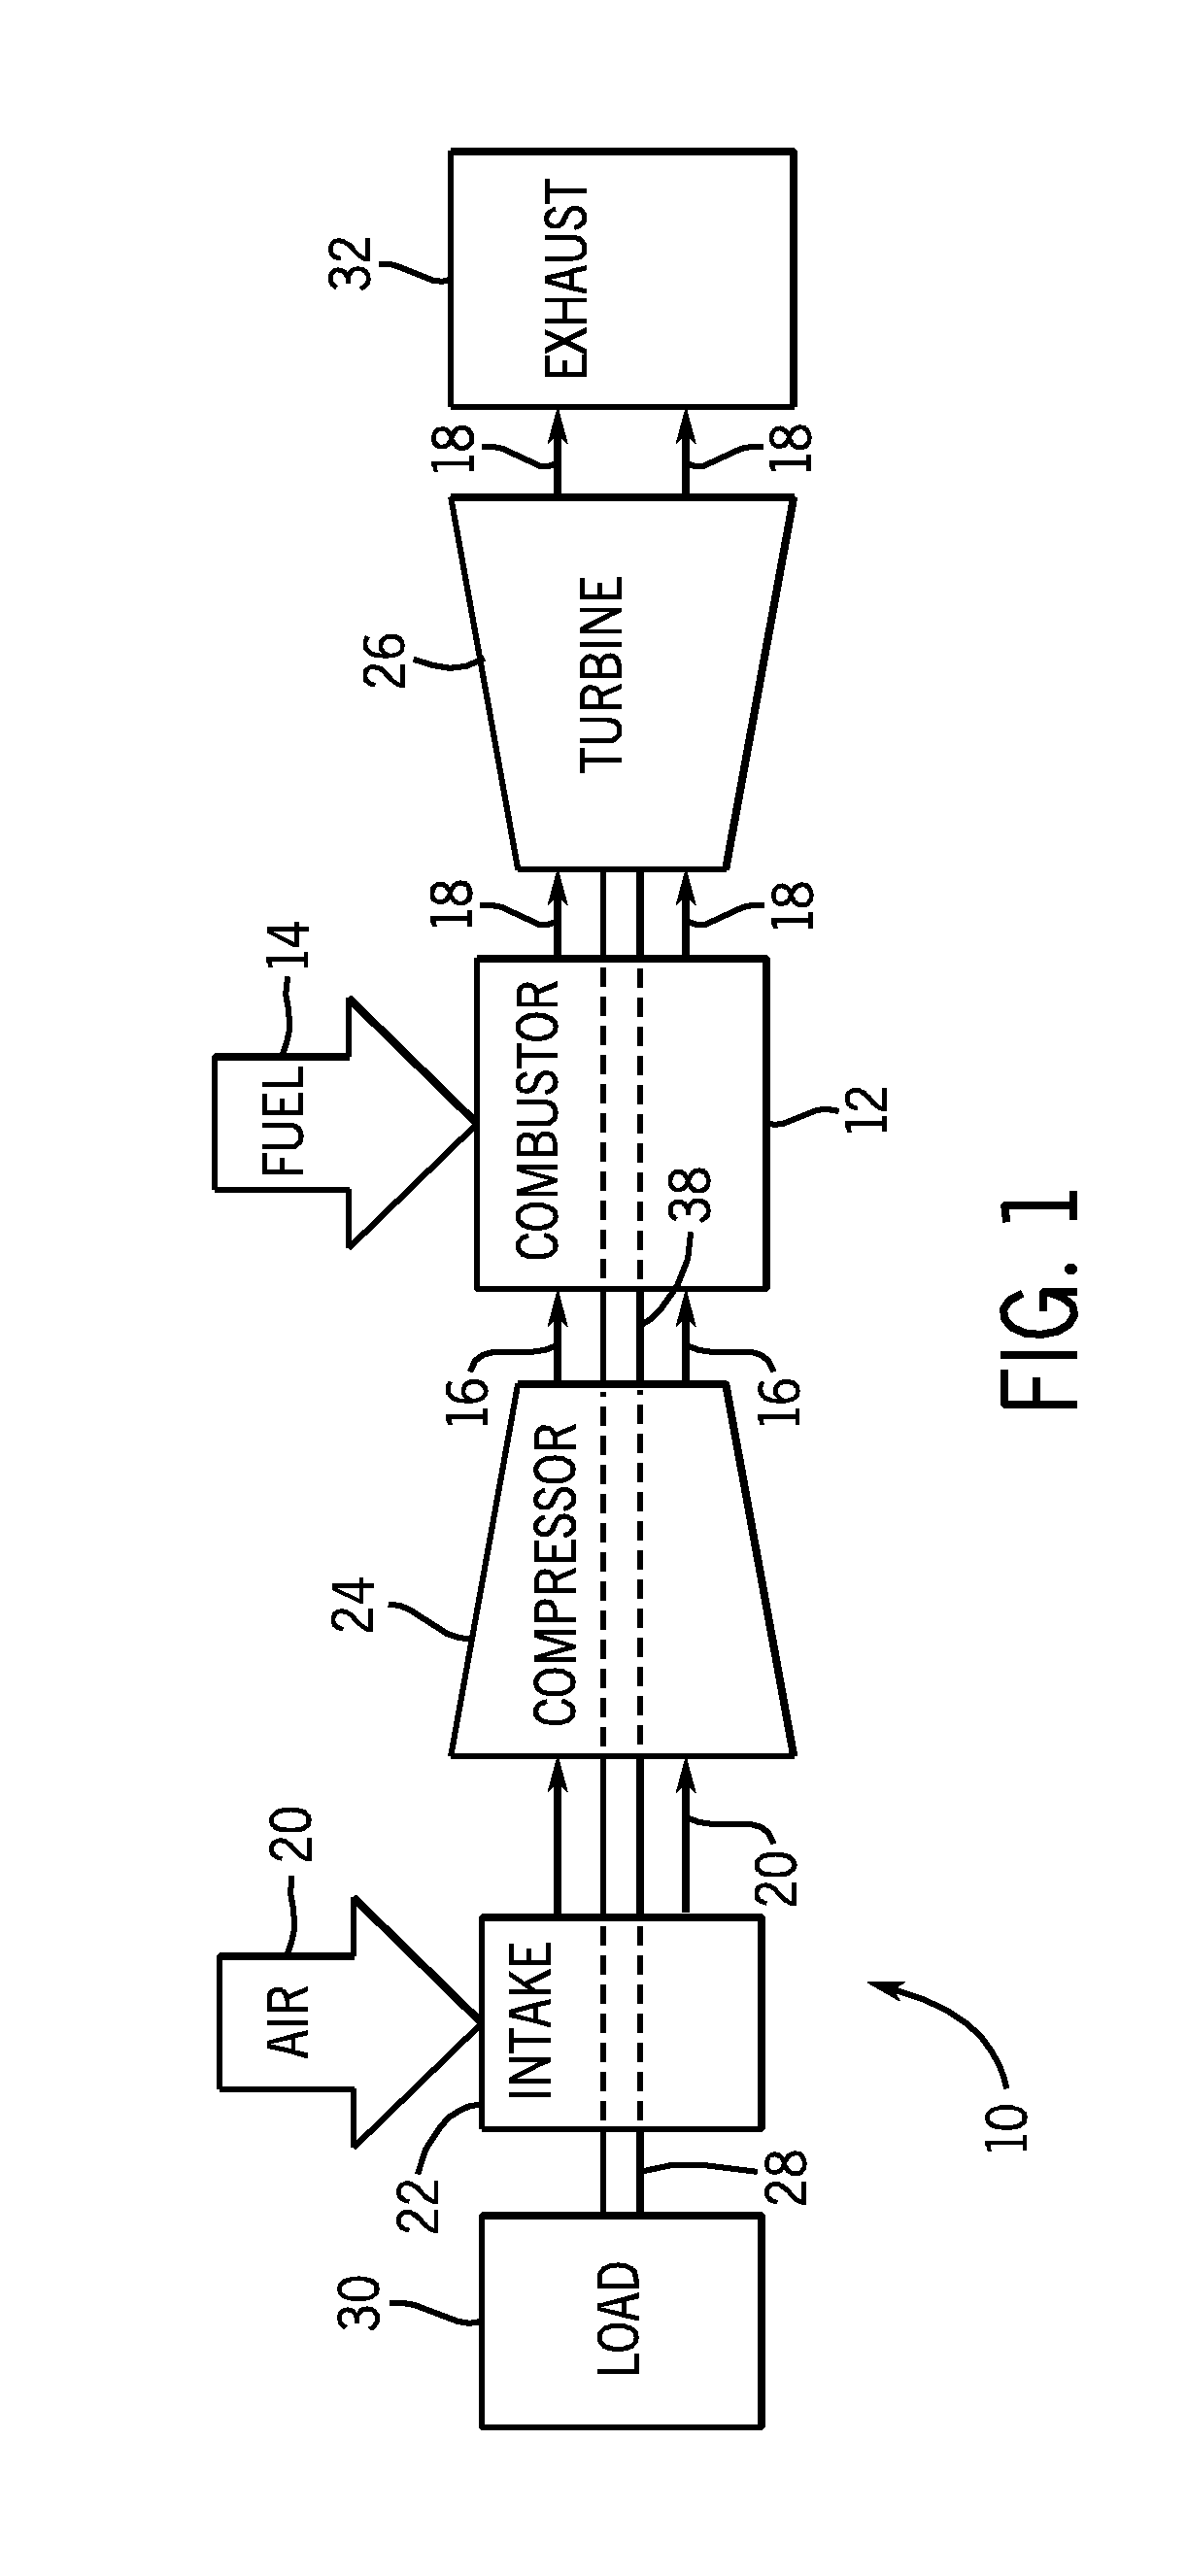 Fuel nozzles for injecting fuel in a gas turbine combustor